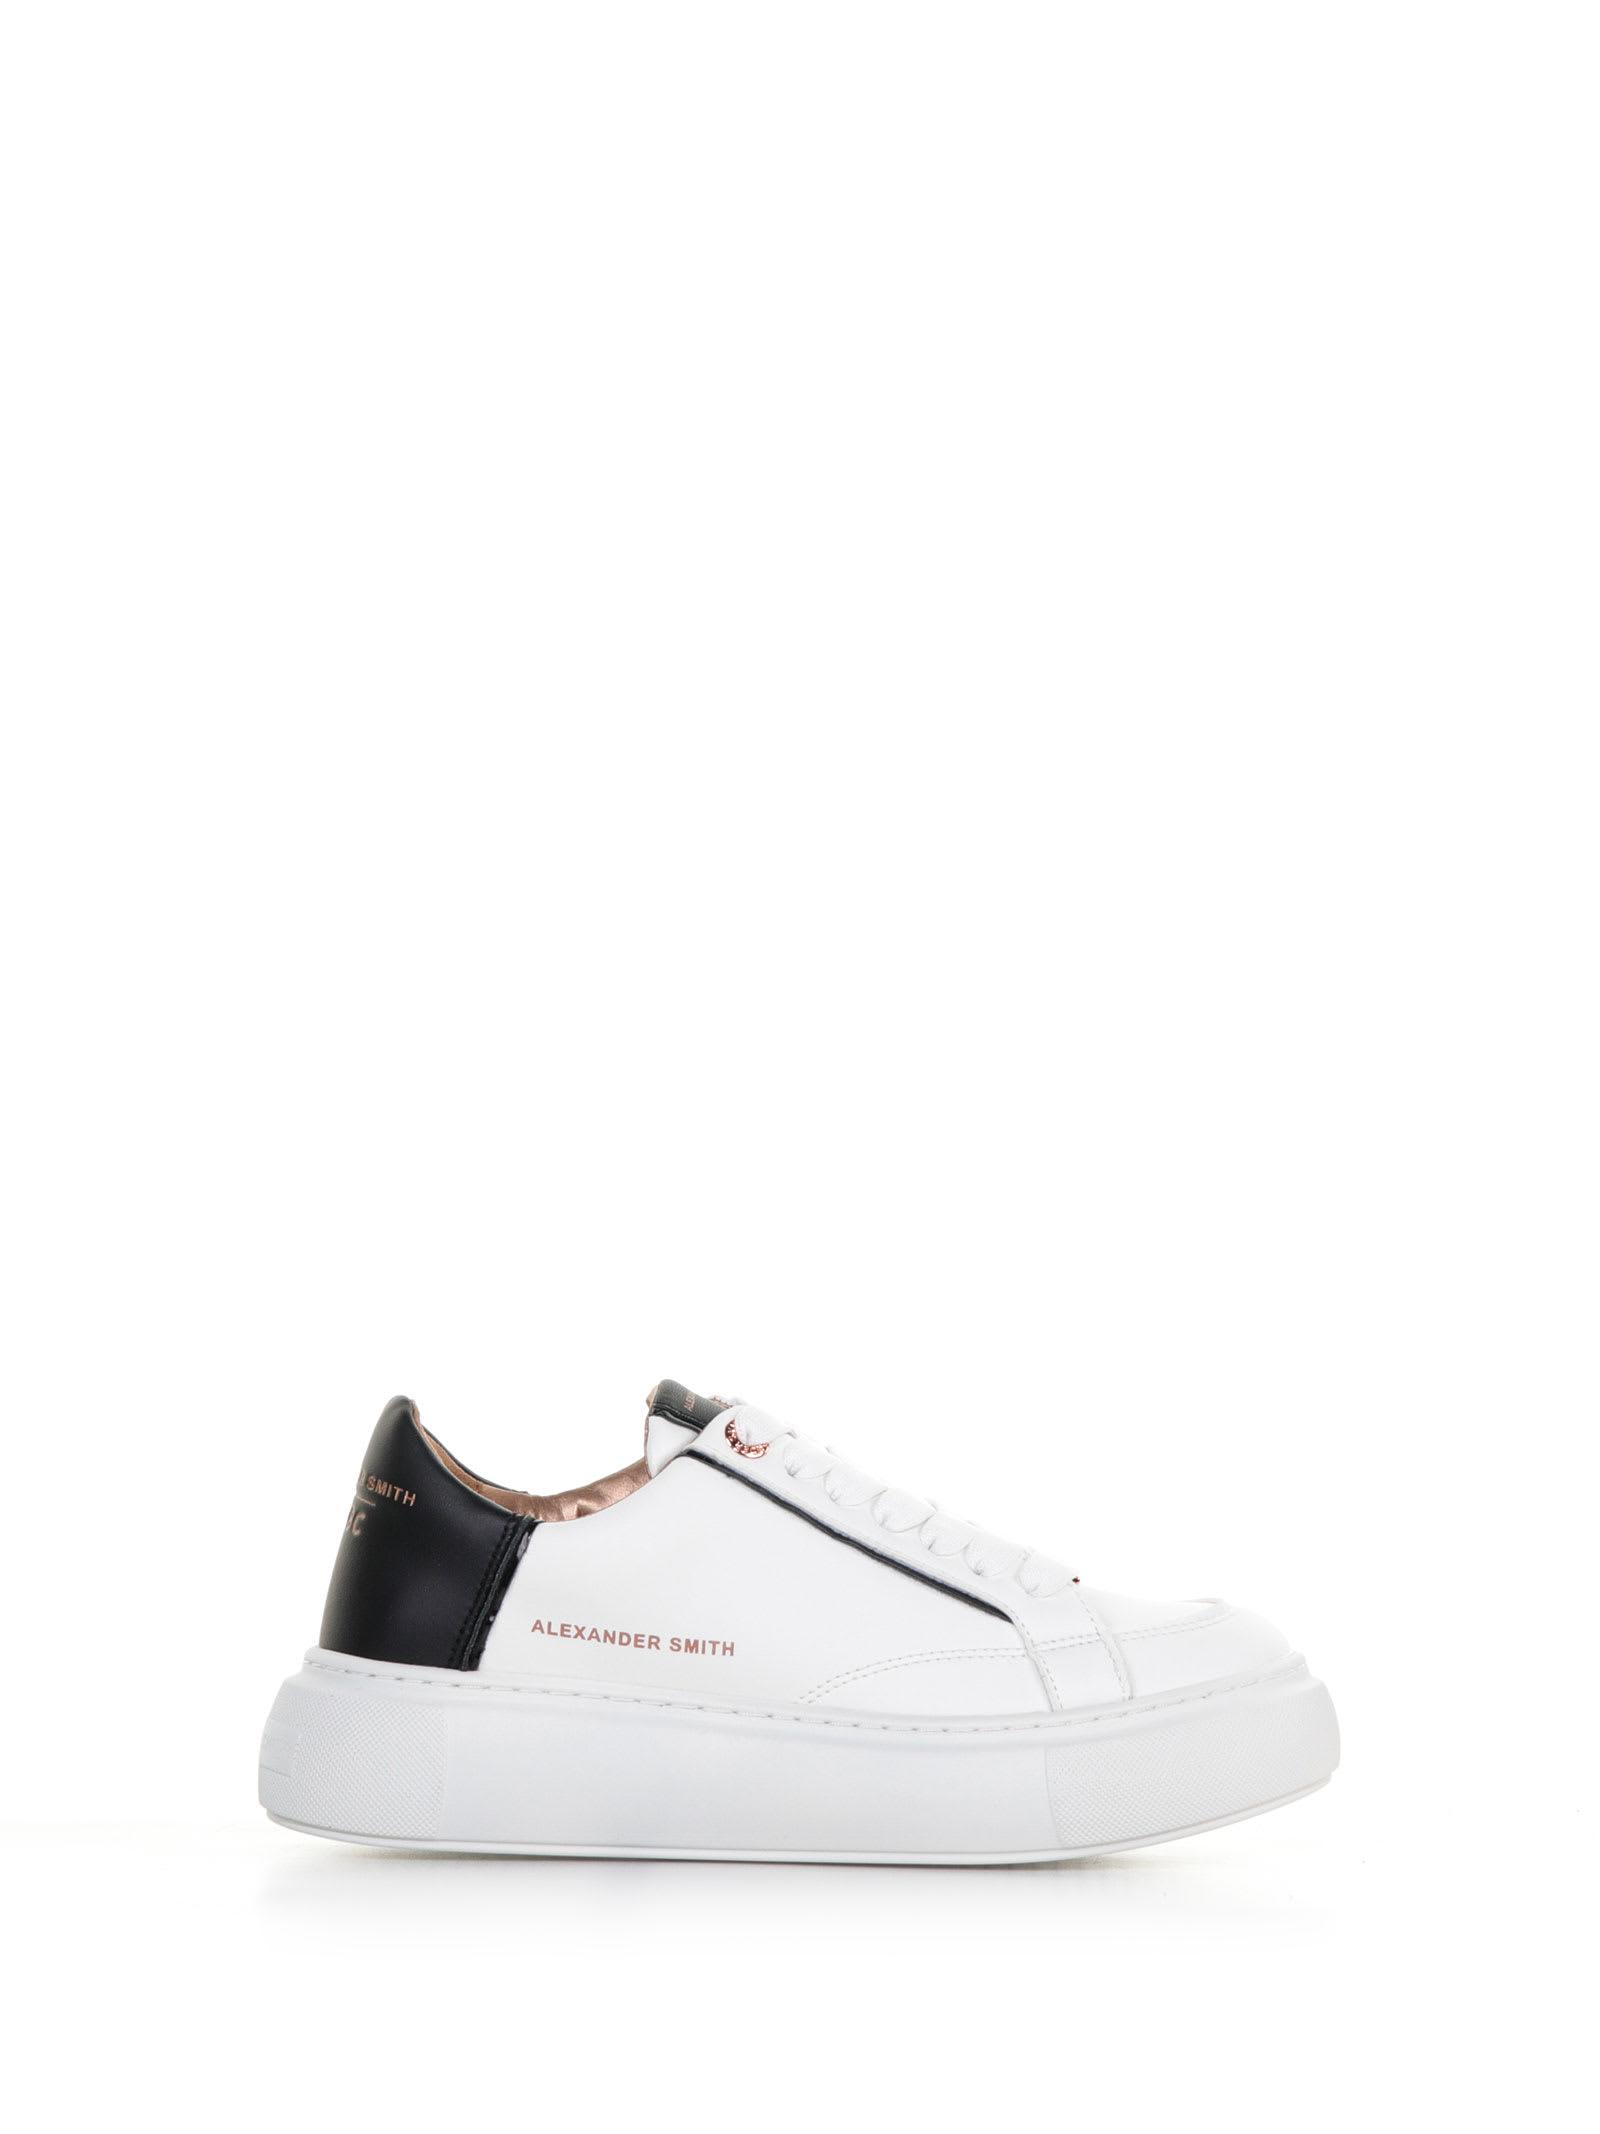 Alexander Smith Leather Sneakers X Acbc in White | Lyst